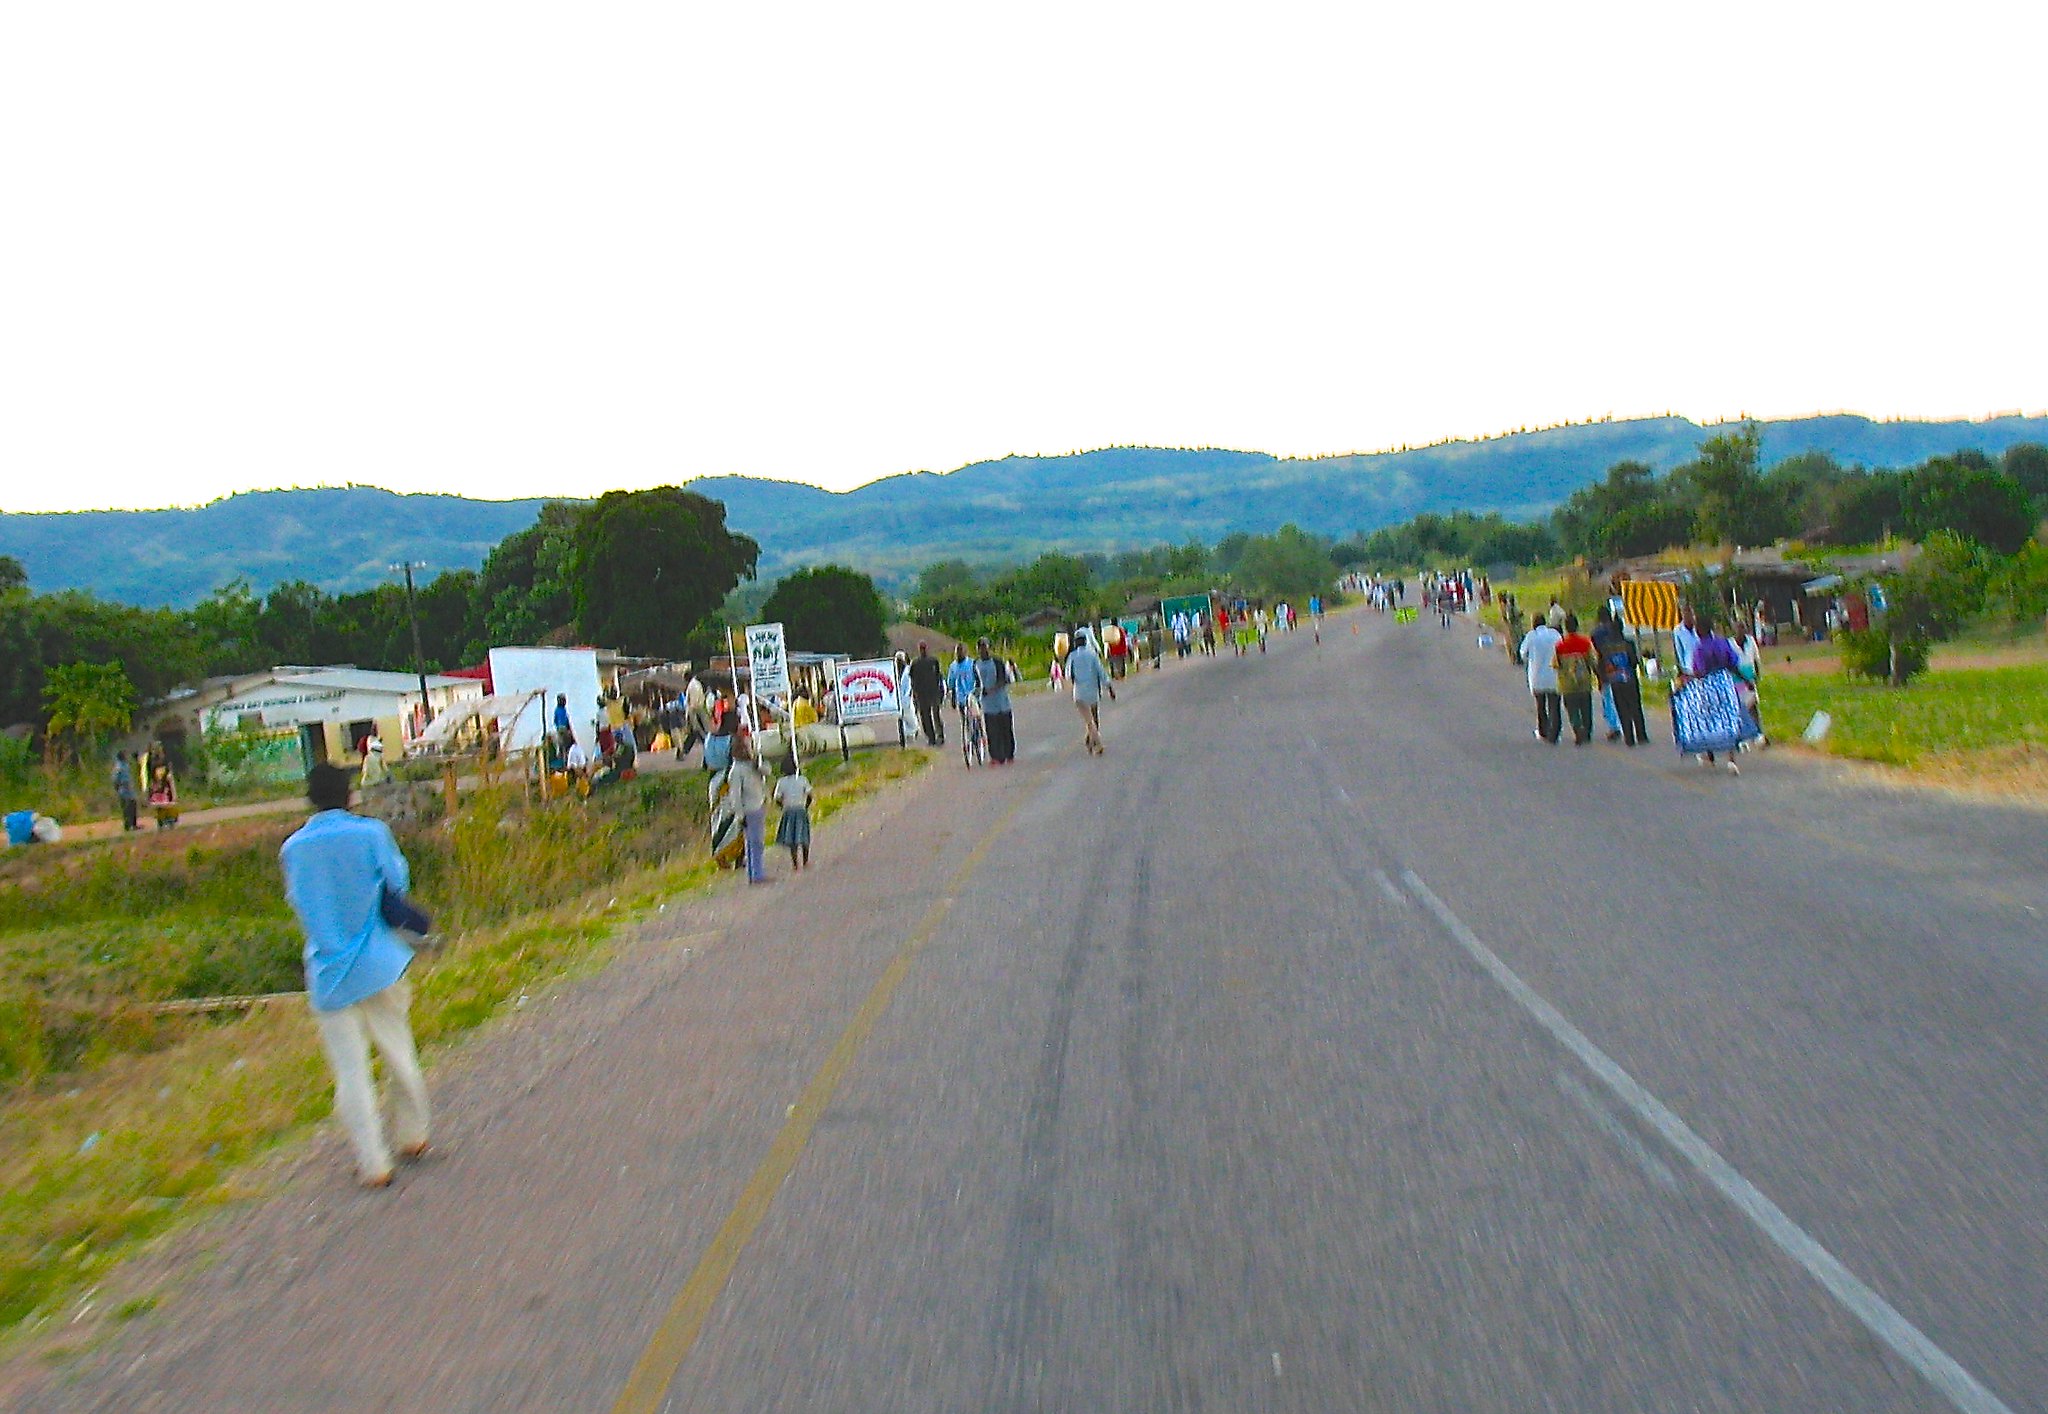 People walking on both sides of a road